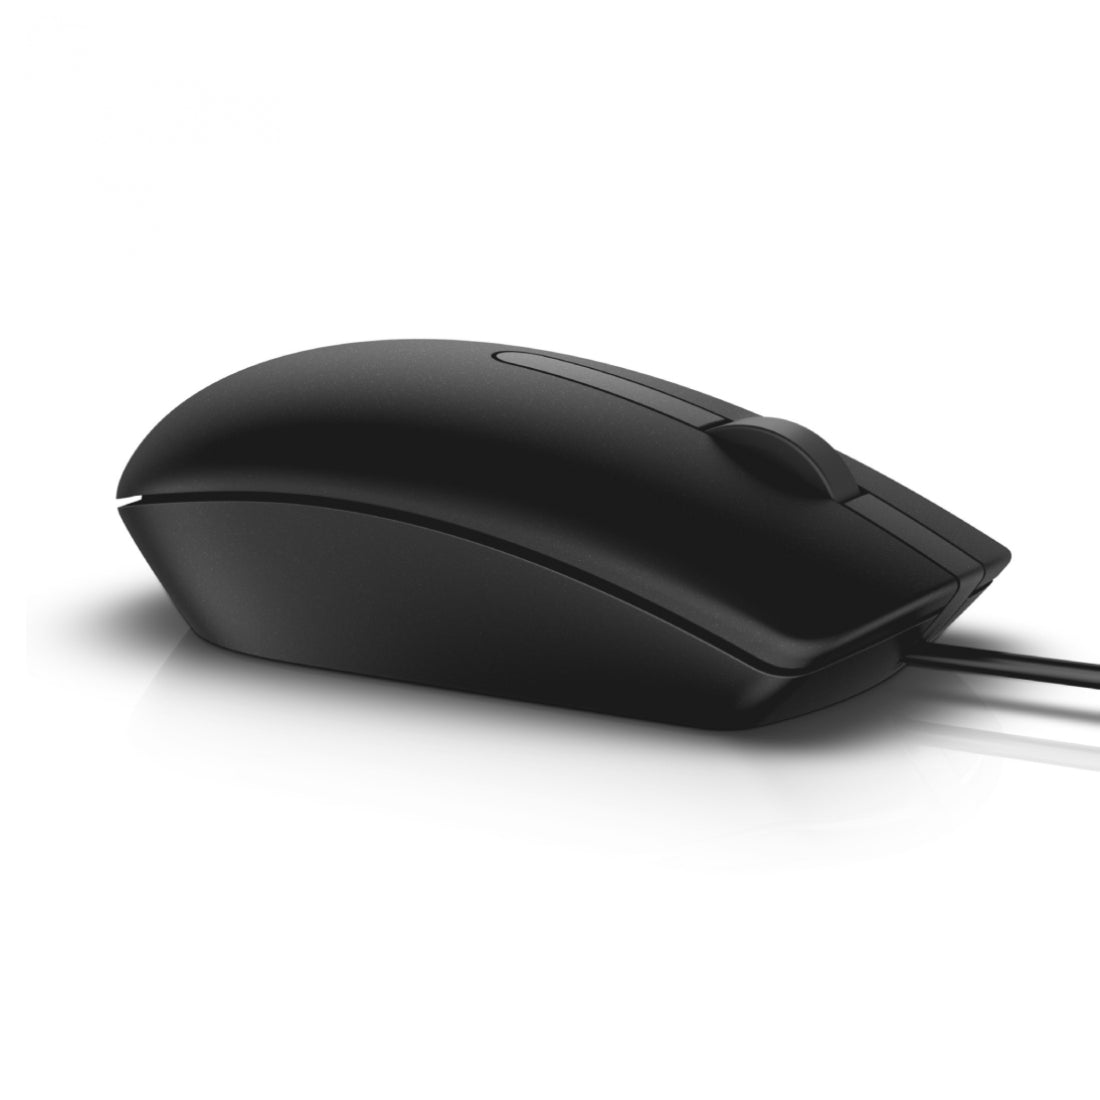 Dell MS116 Wired Optical Mouse - Black - فأرة - Store 974 | ستور ٩٧٤